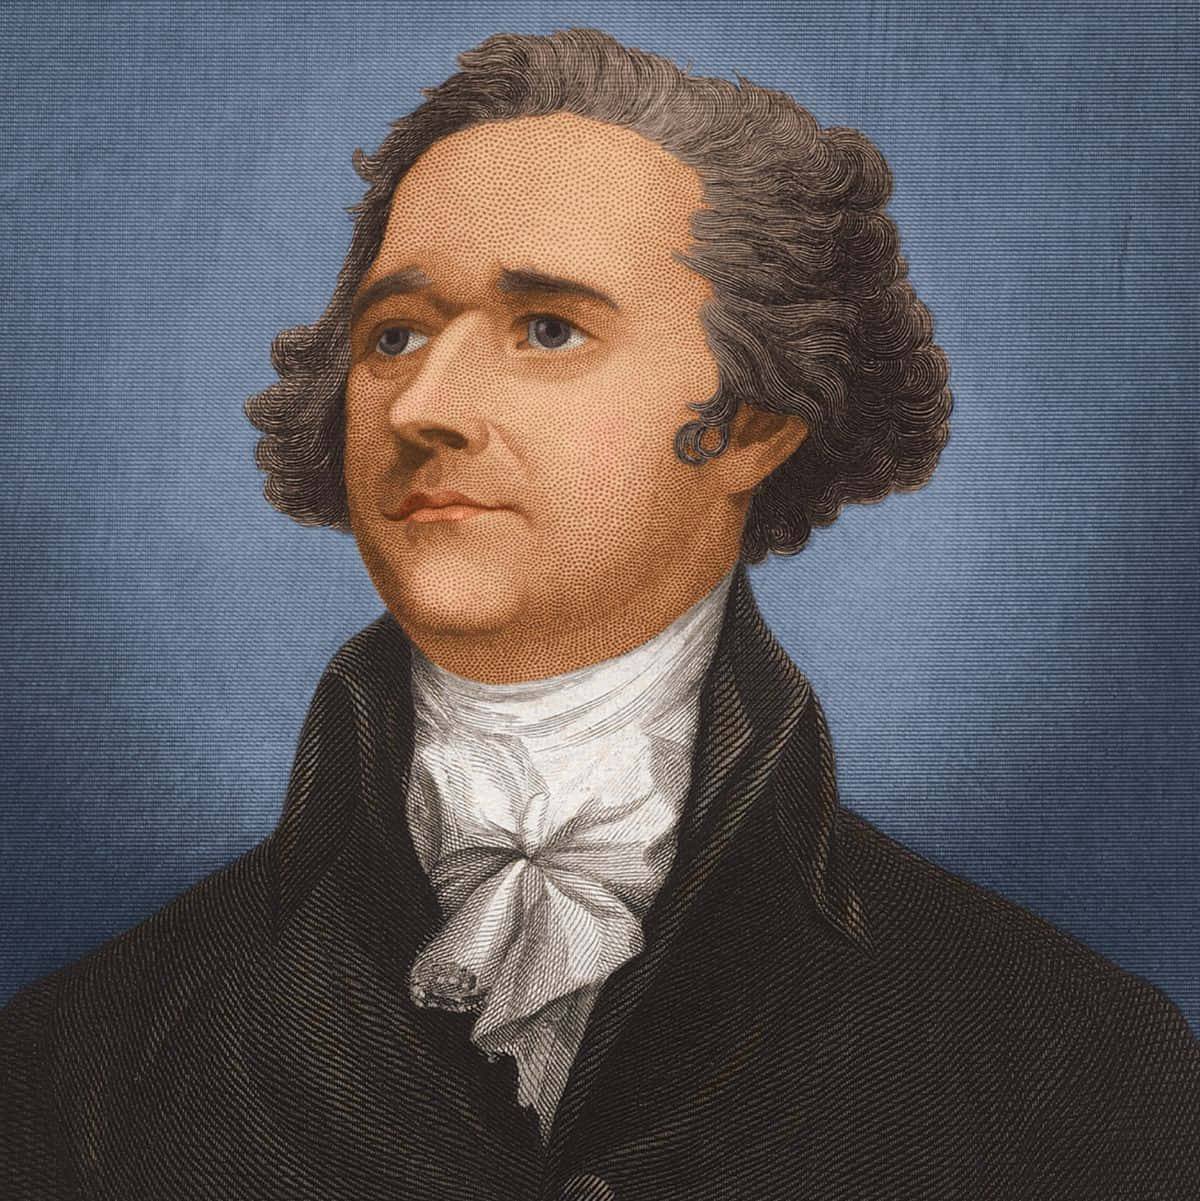 Alexander Hamilton was a Founding Father and the first Secretary of the Treasury